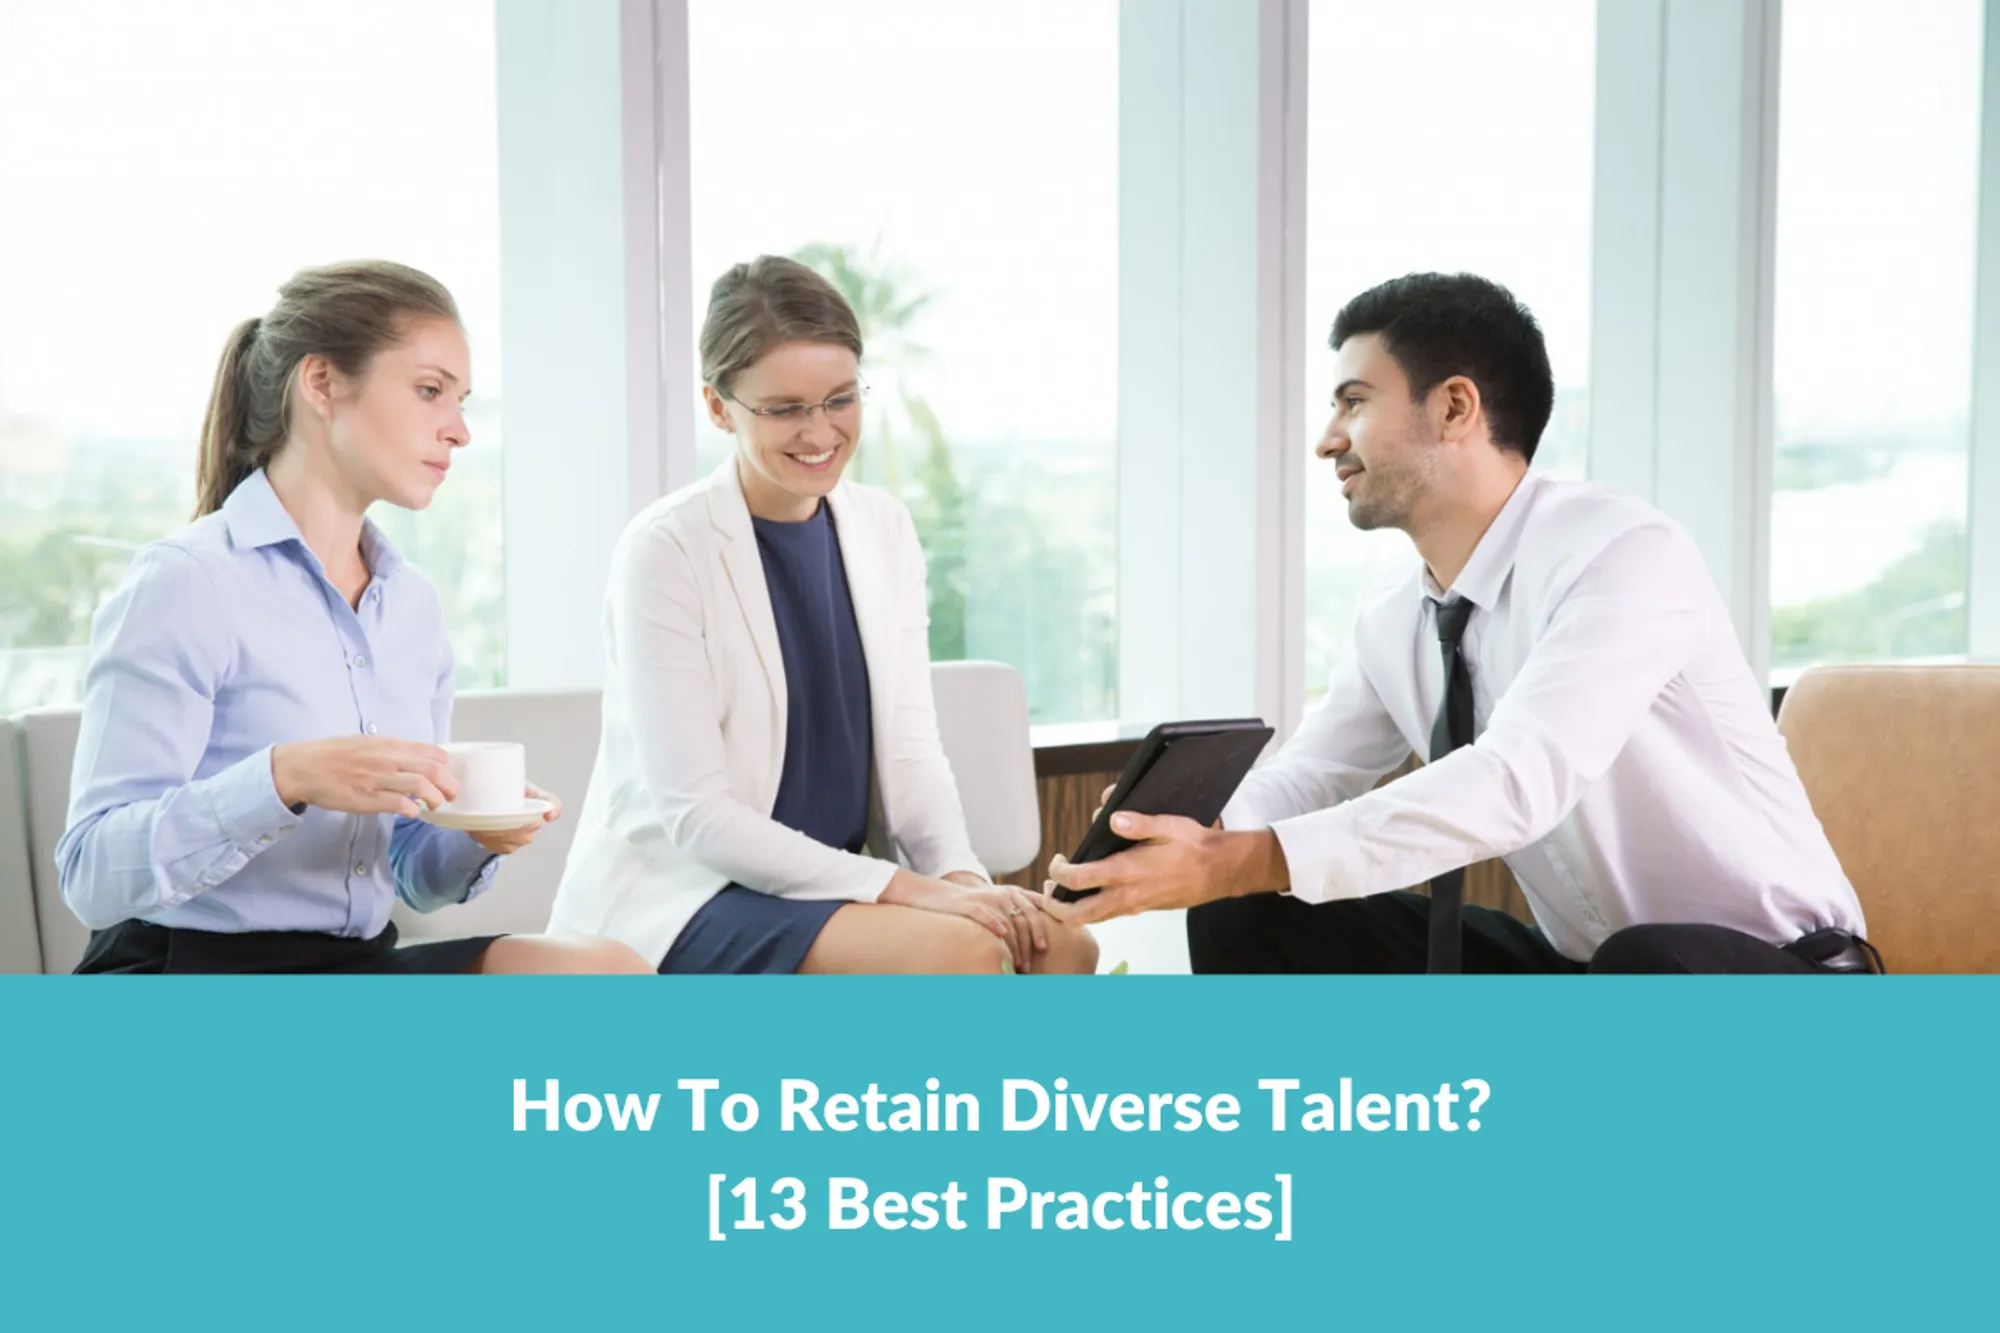 You are currently viewing How To Retain Diverse Talent? [13 Best Practices]